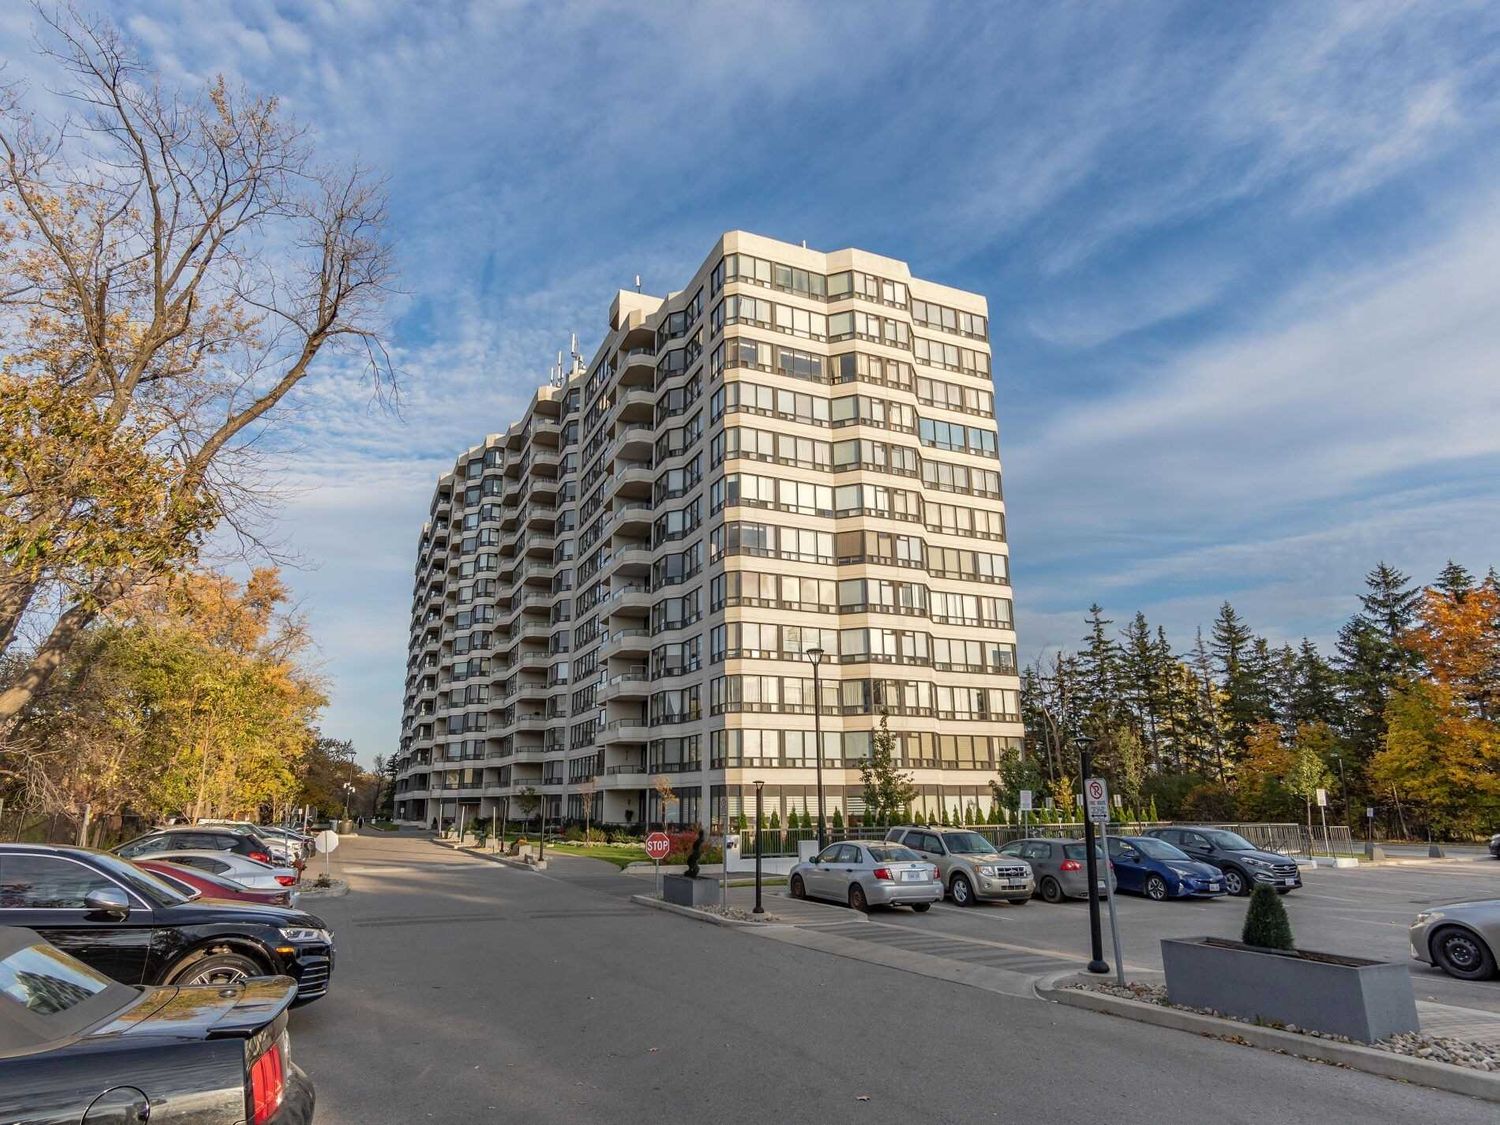 8501 Bayview Avenue. Bayview Towers Condos is located in  Richmond Hill, Toronto - image #2 of 3